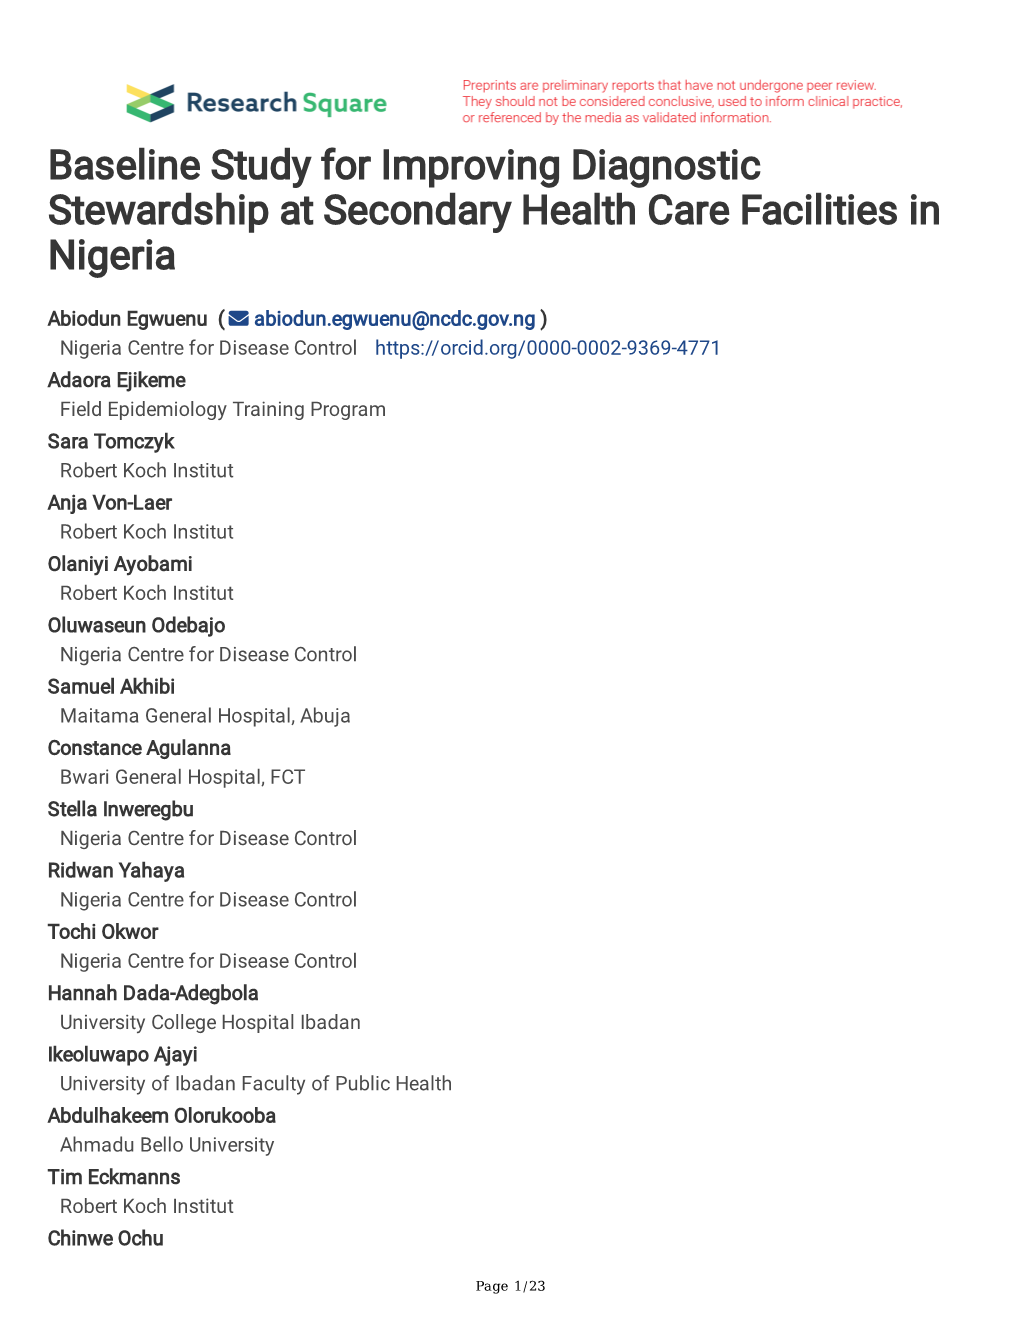 Baseline Study for Improving Diagnostic Stewardship at Secondary Health Care Facilities in Nigeria